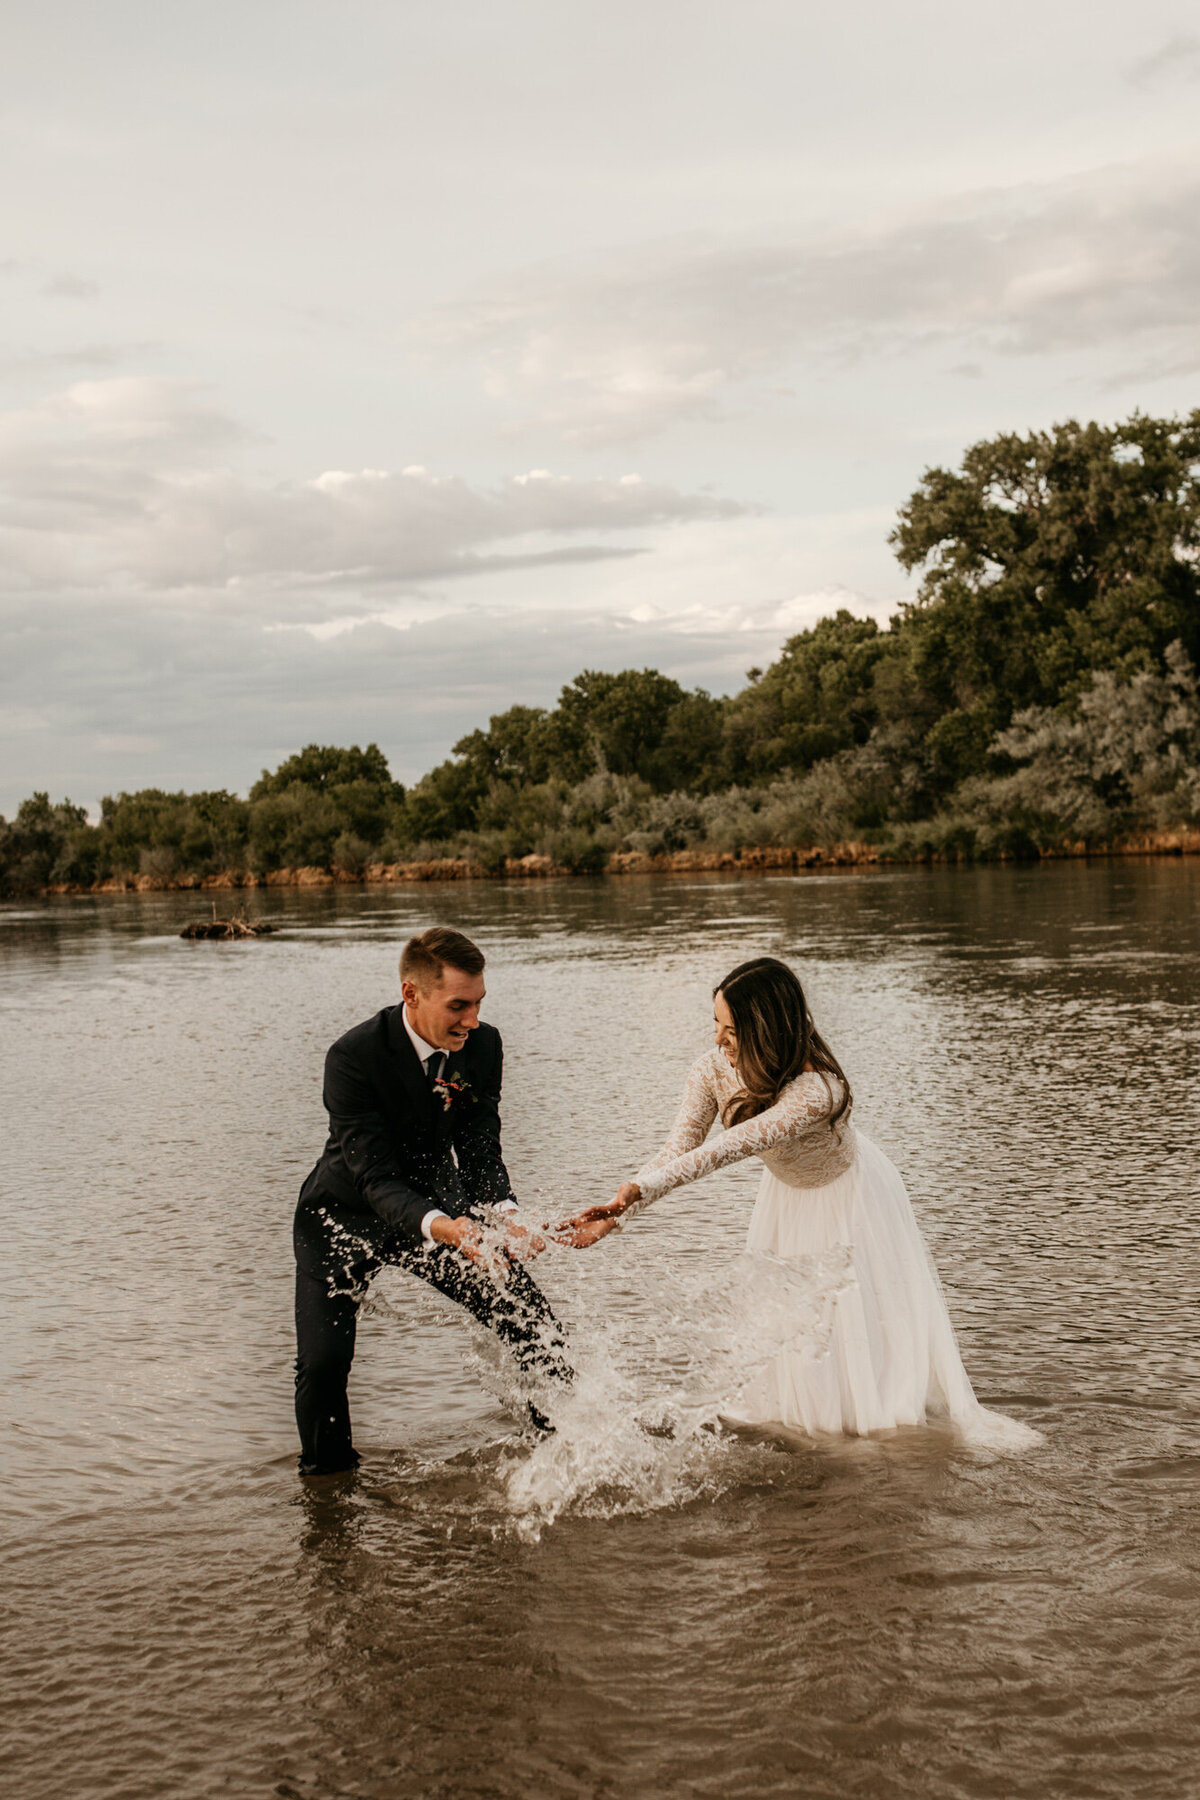 Newlyweds splashing and playing in river